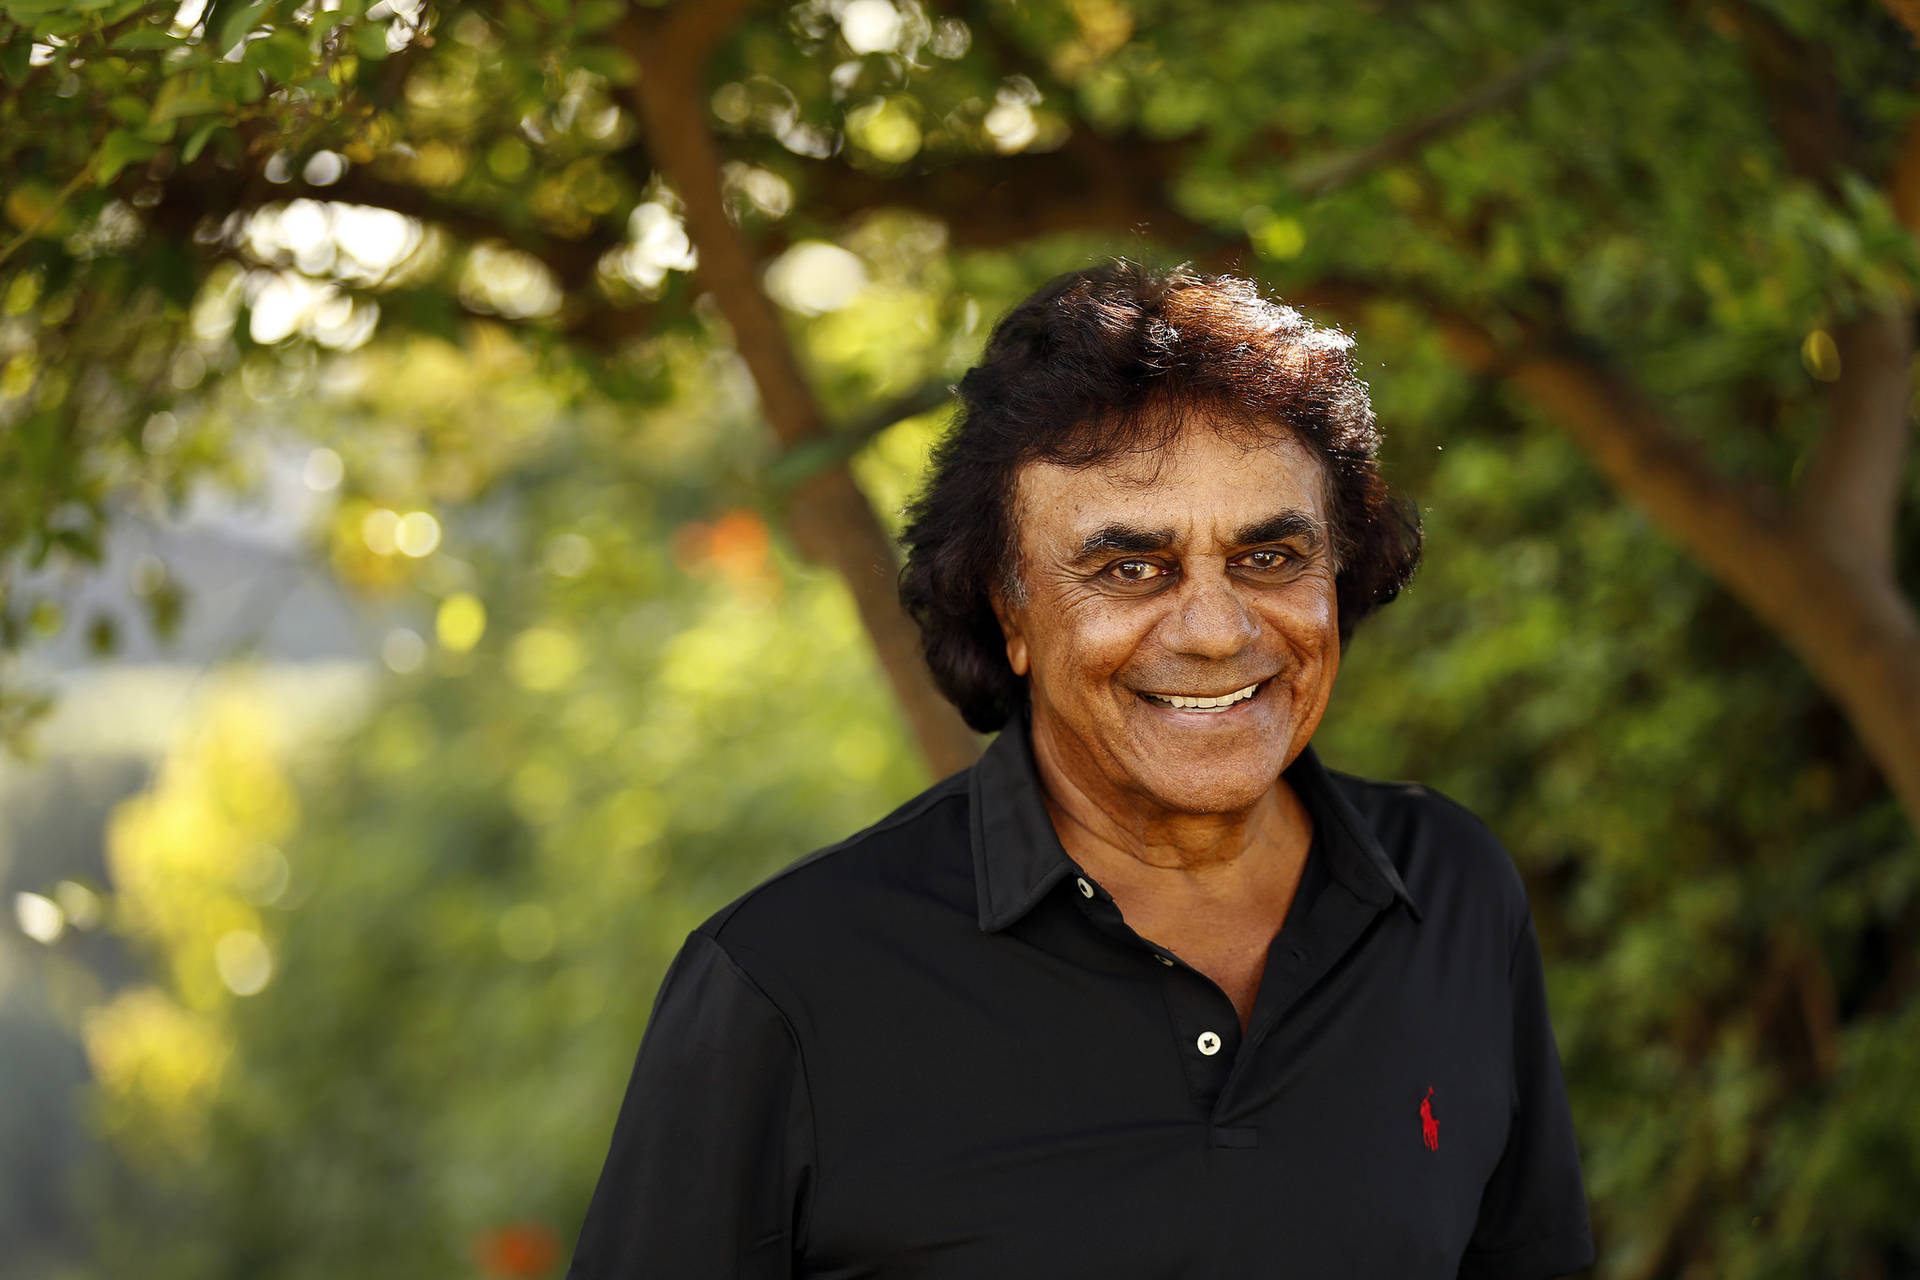 Johnny Mathis Outdoor Photograph Wallpaper